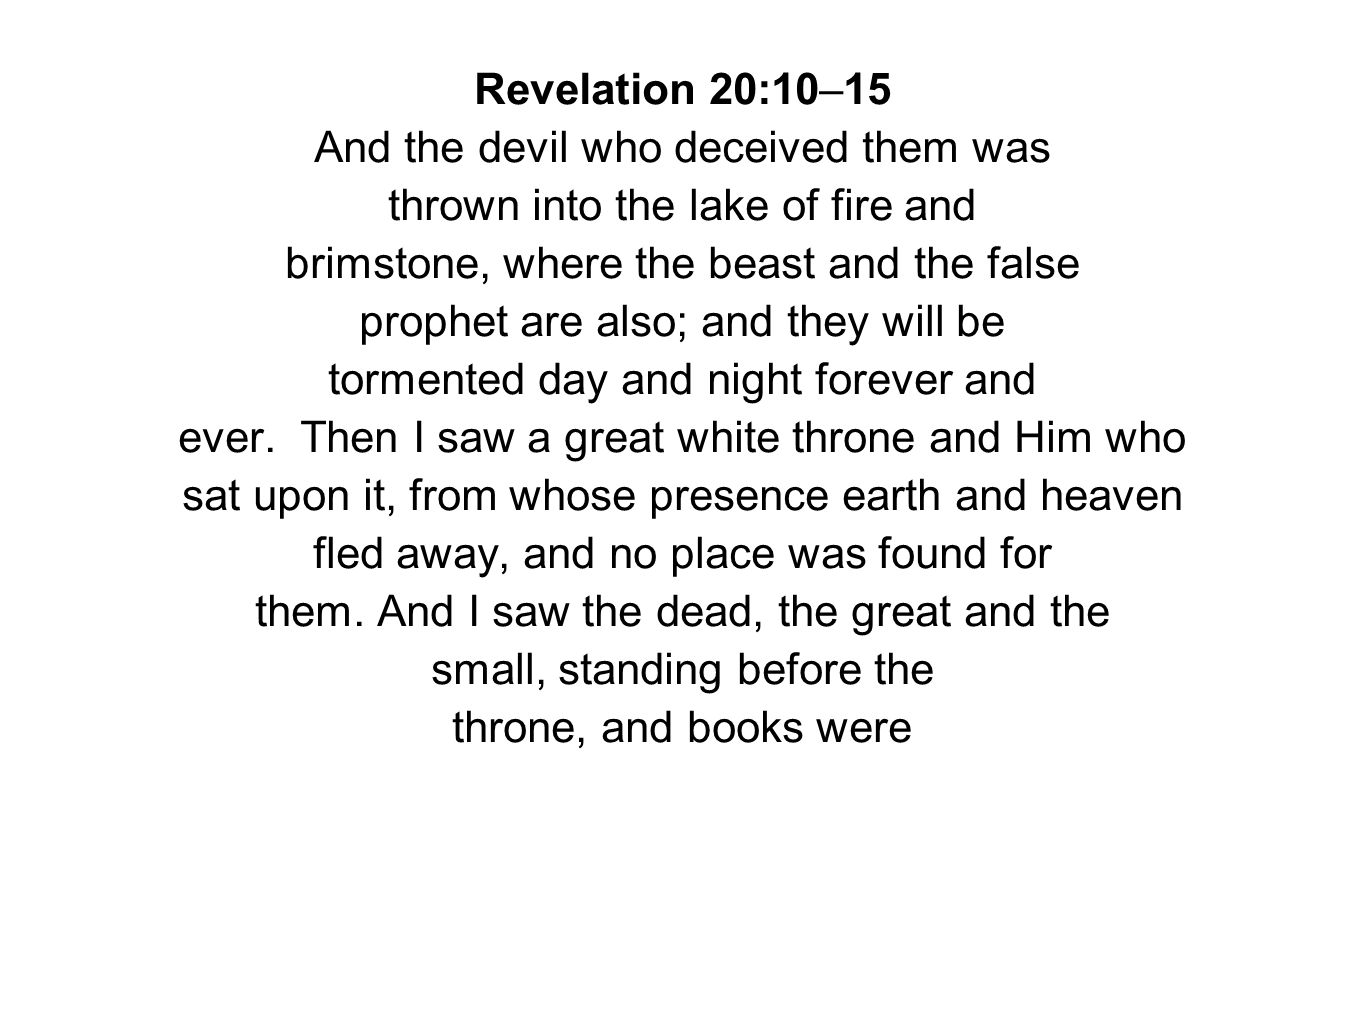 Revelation 20:10–15 And the devil who deceived them was thrown into the lake of fire and brimstone, where the beast and the false prophet are also; and they will be tormented day and night forever and ever.